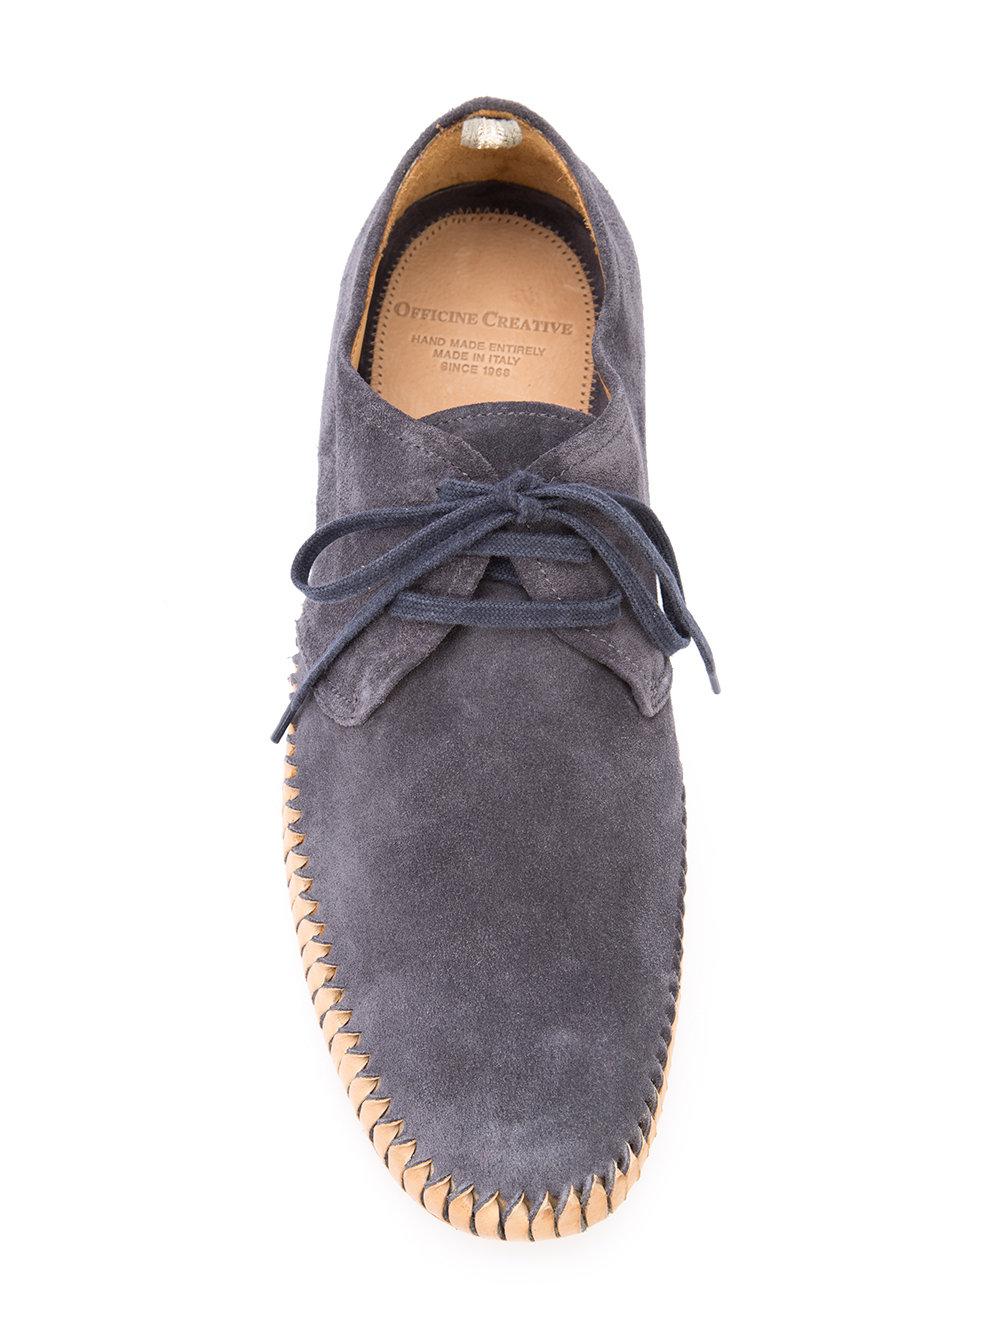 Officine Creative Leather Maurice Boat Shoes in Blue for Men - Lyst